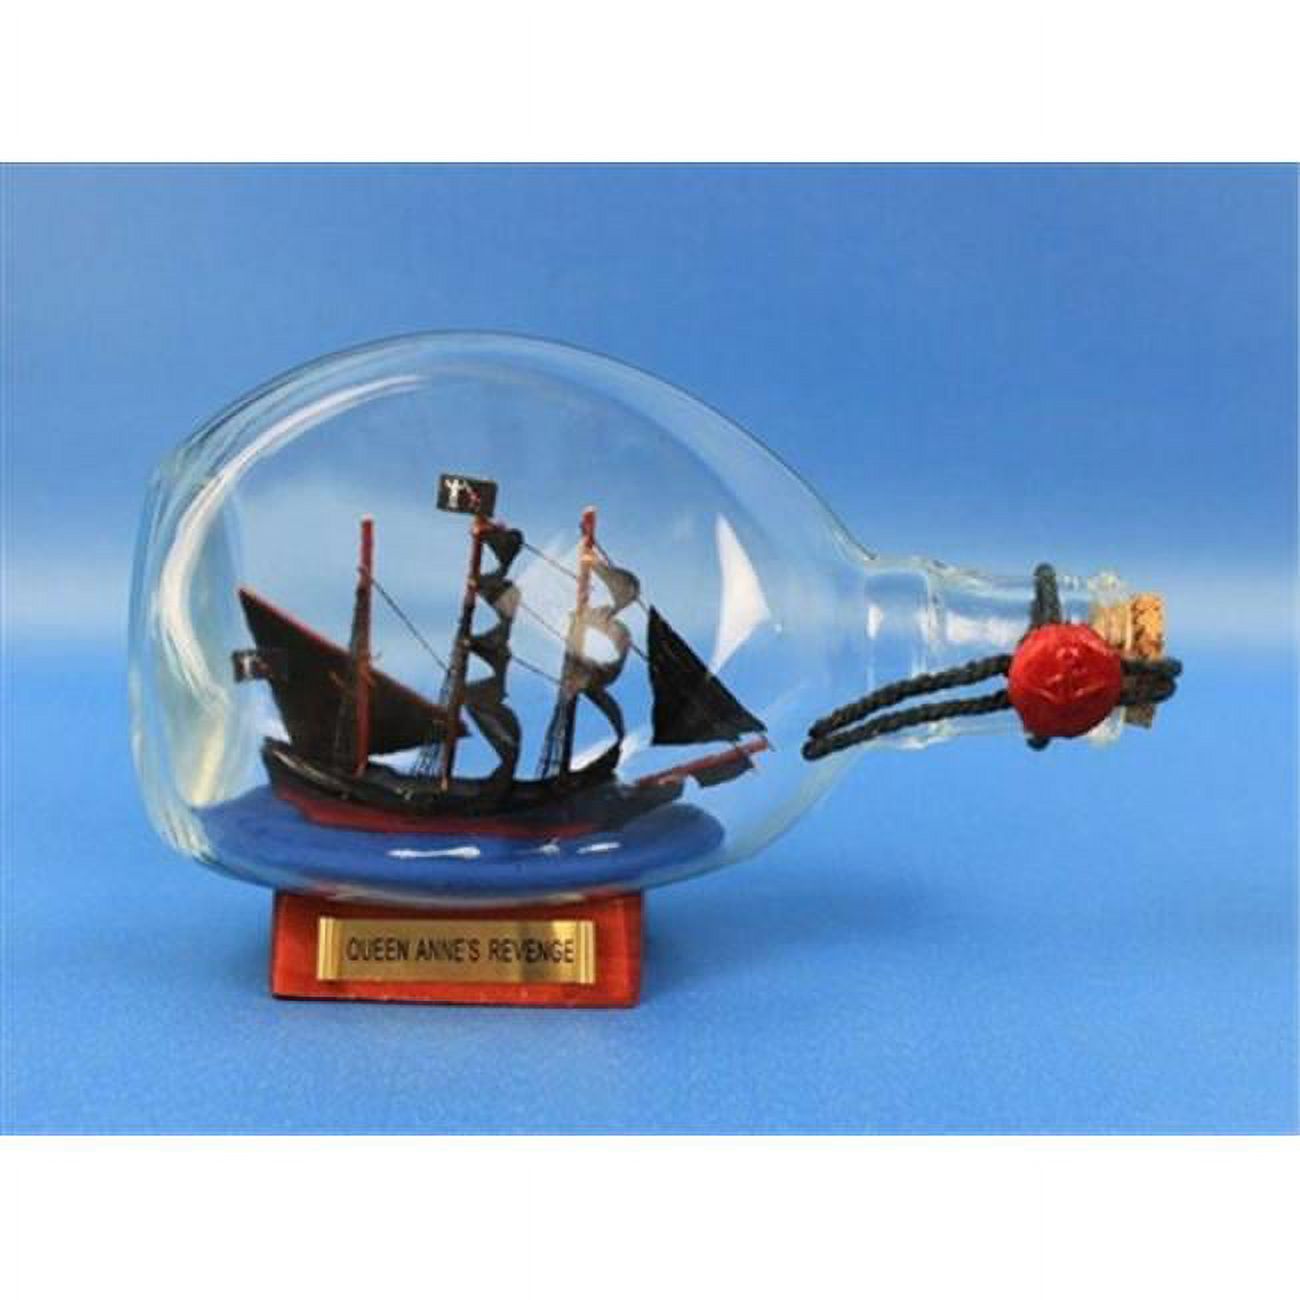 Handcrafted Model Ships  Blackbeards Queen Annes Revenge Pirate Ship in a Bottle 7 in. Ships In A Bottle Decorative Accent - image 1 of 3